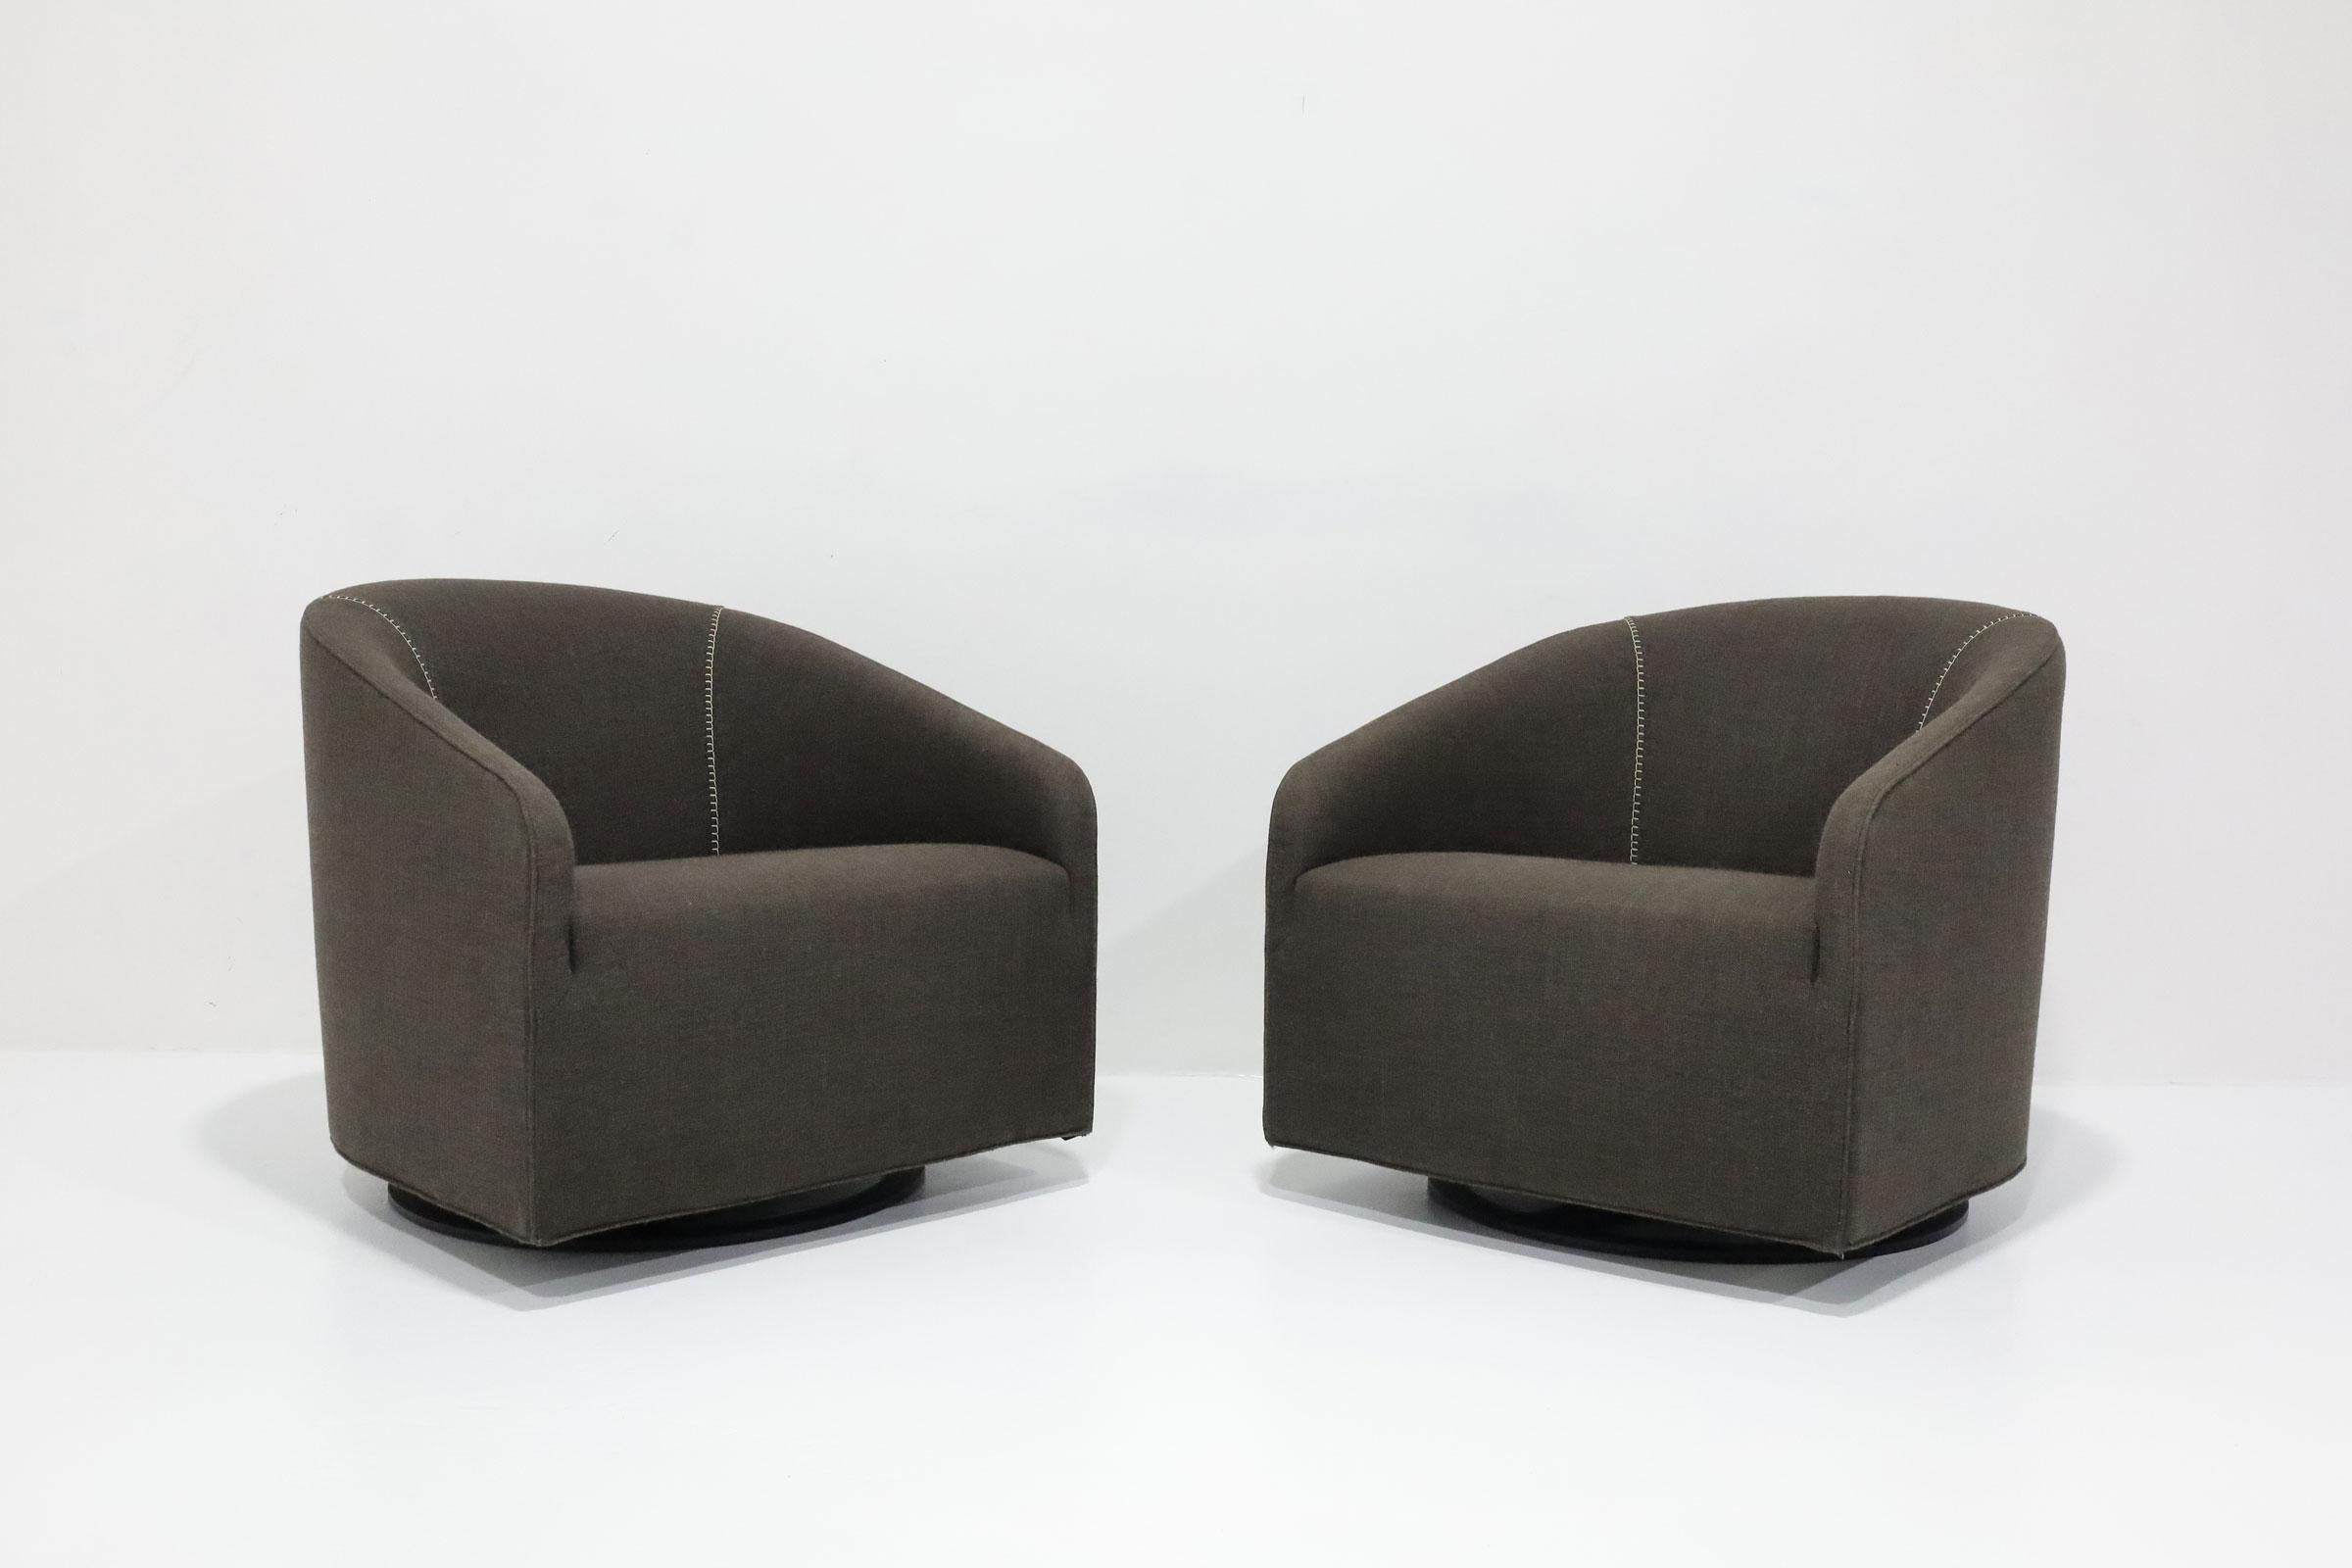 Like new great looking swivel lounge chairs designed by Rudolfo Dordoni for Minotti.